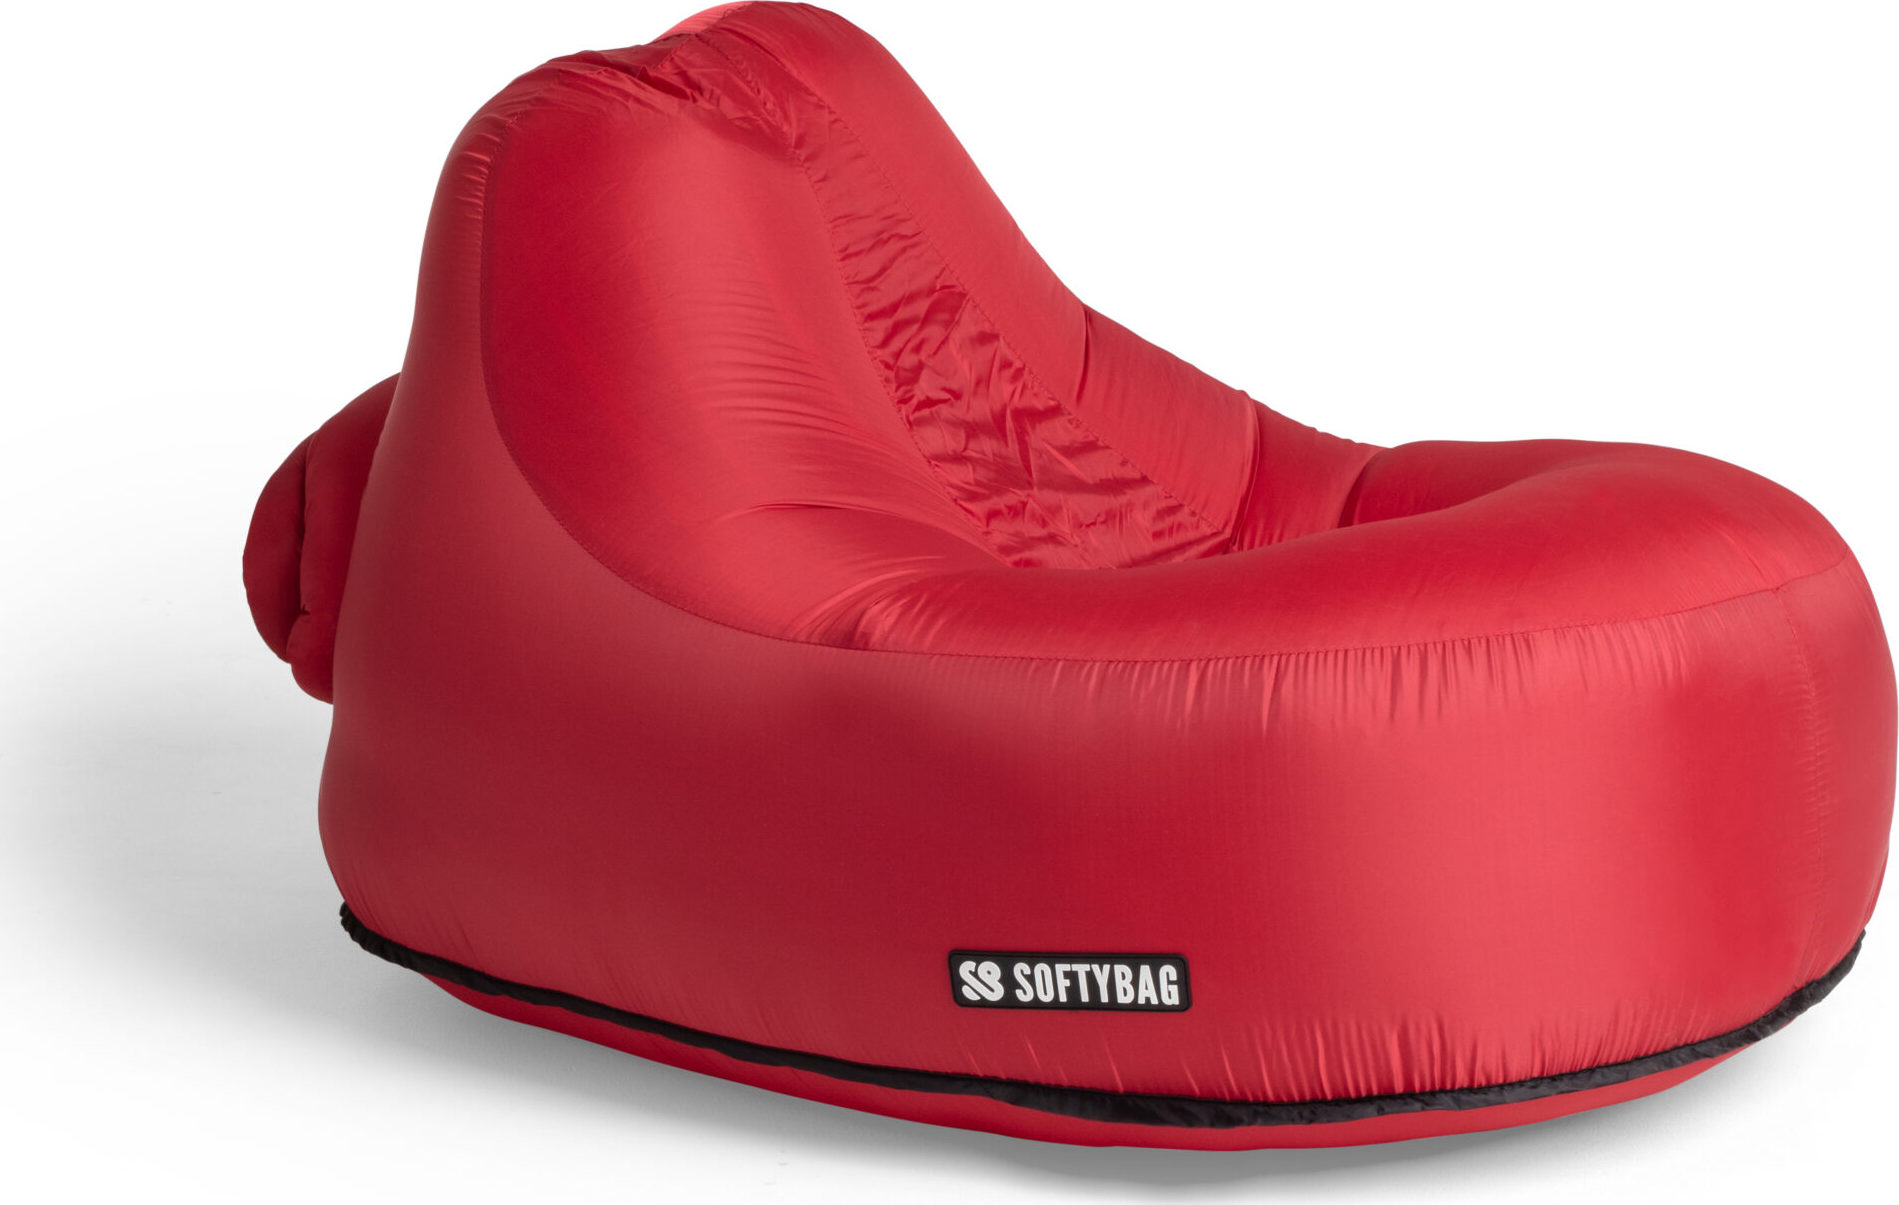 Softybag Chair Kids Chili Red